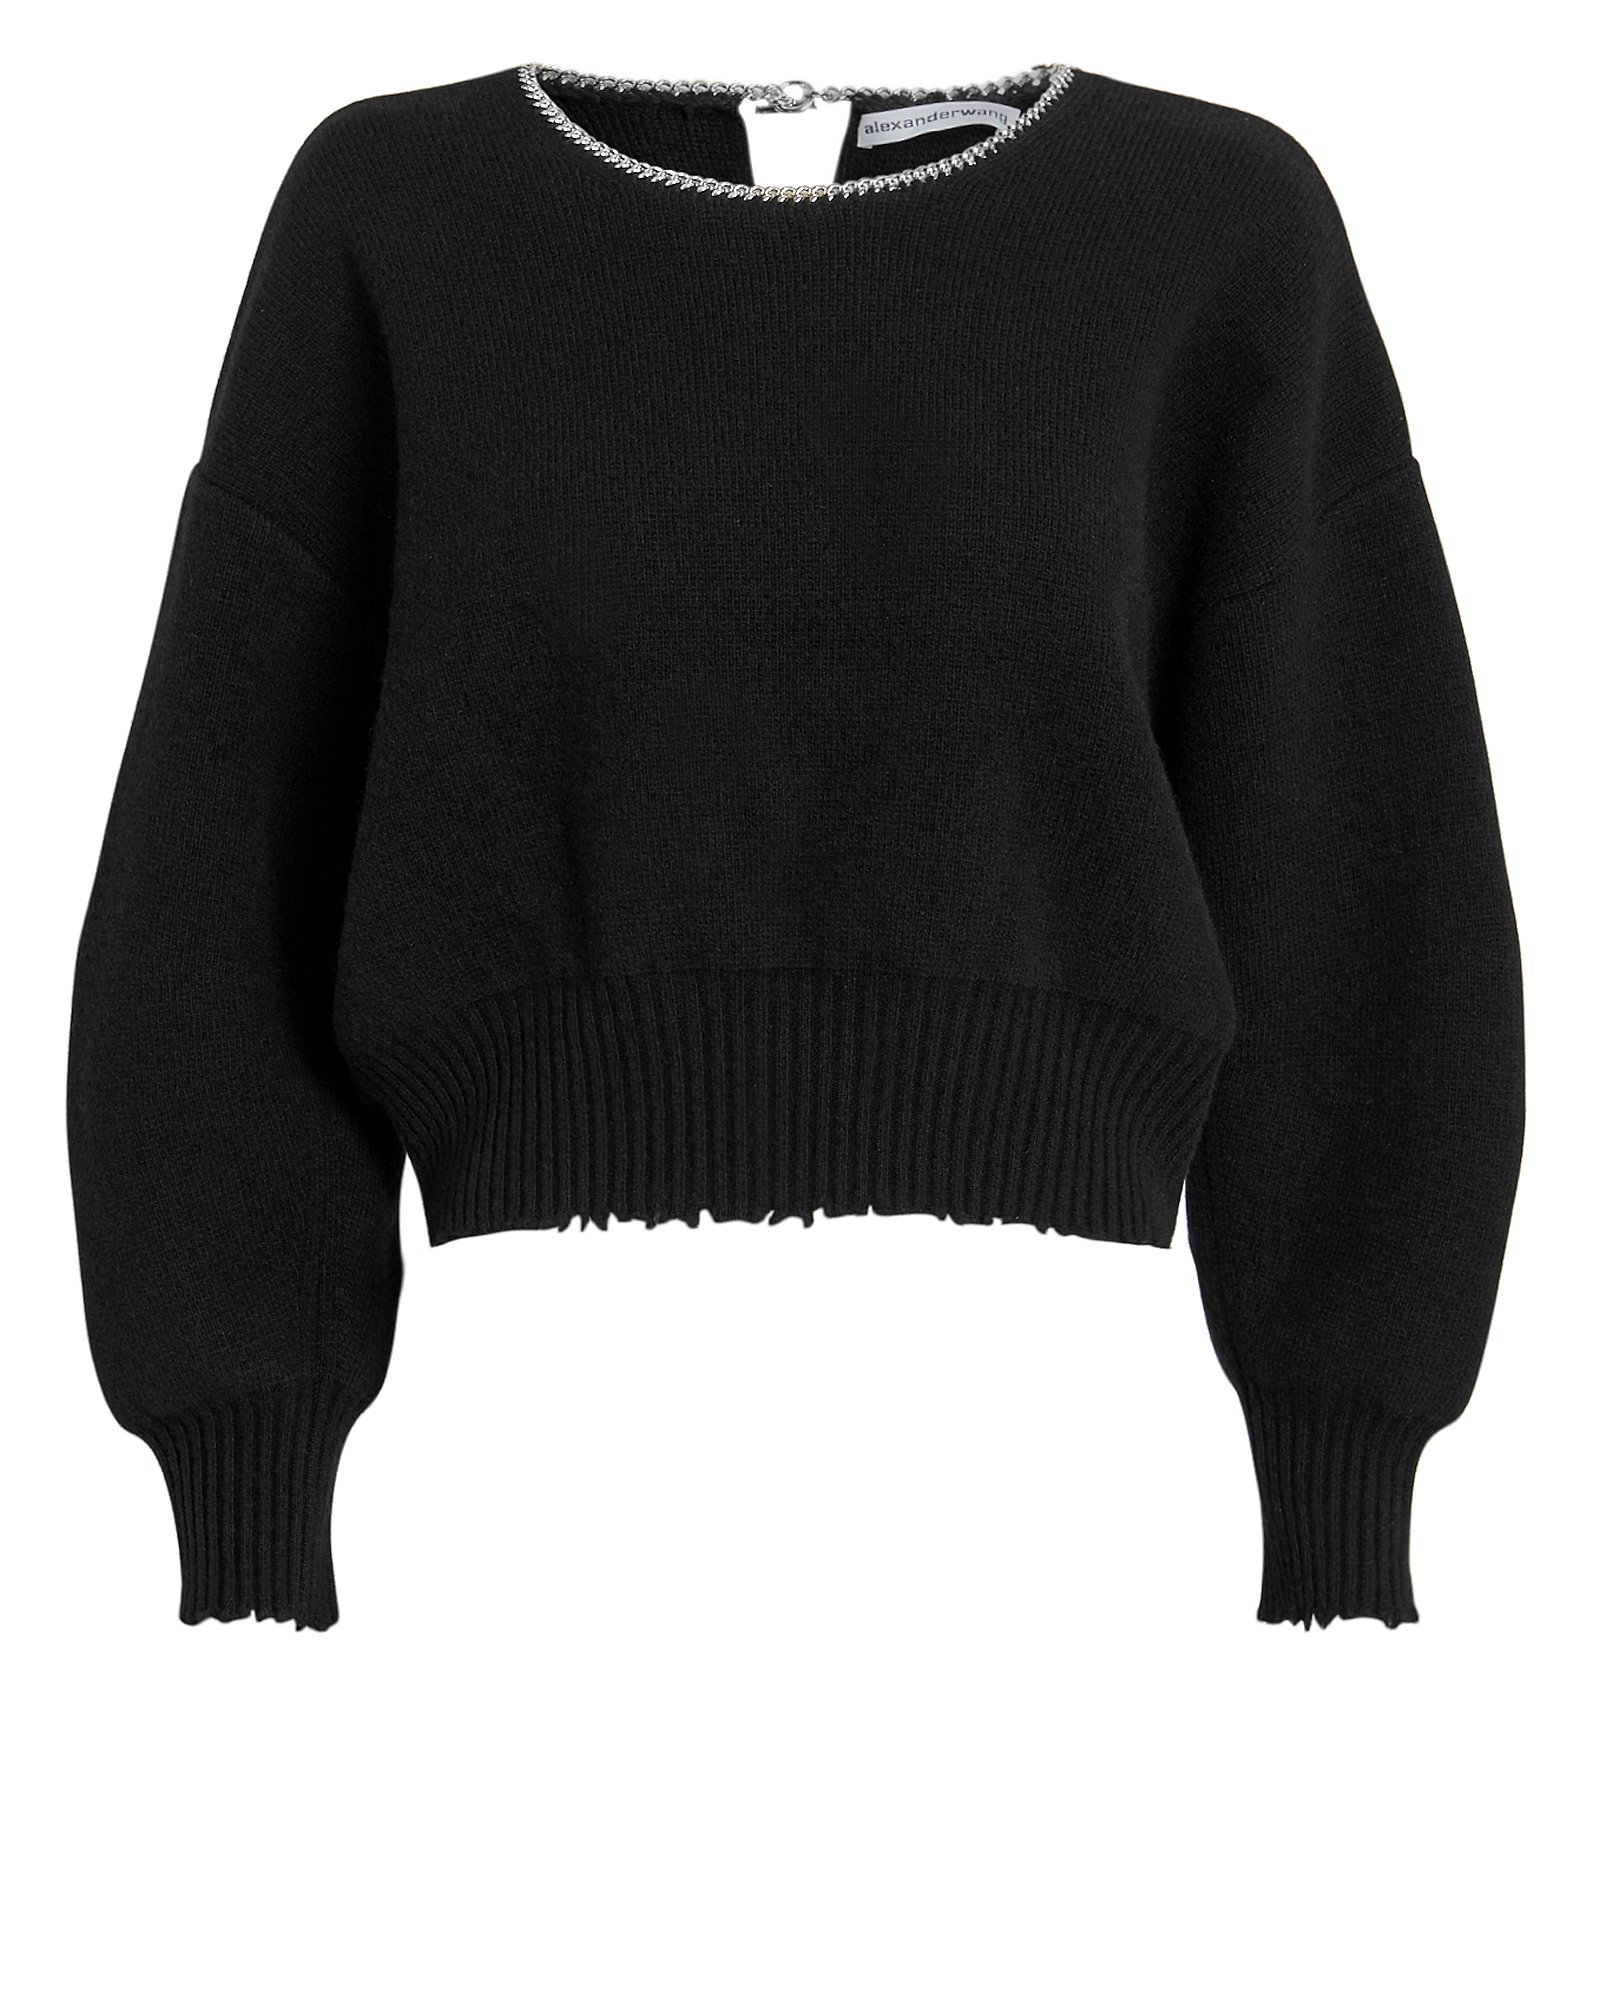 Alexander Wang Curb Chain Embellished Sweater | ModeSens